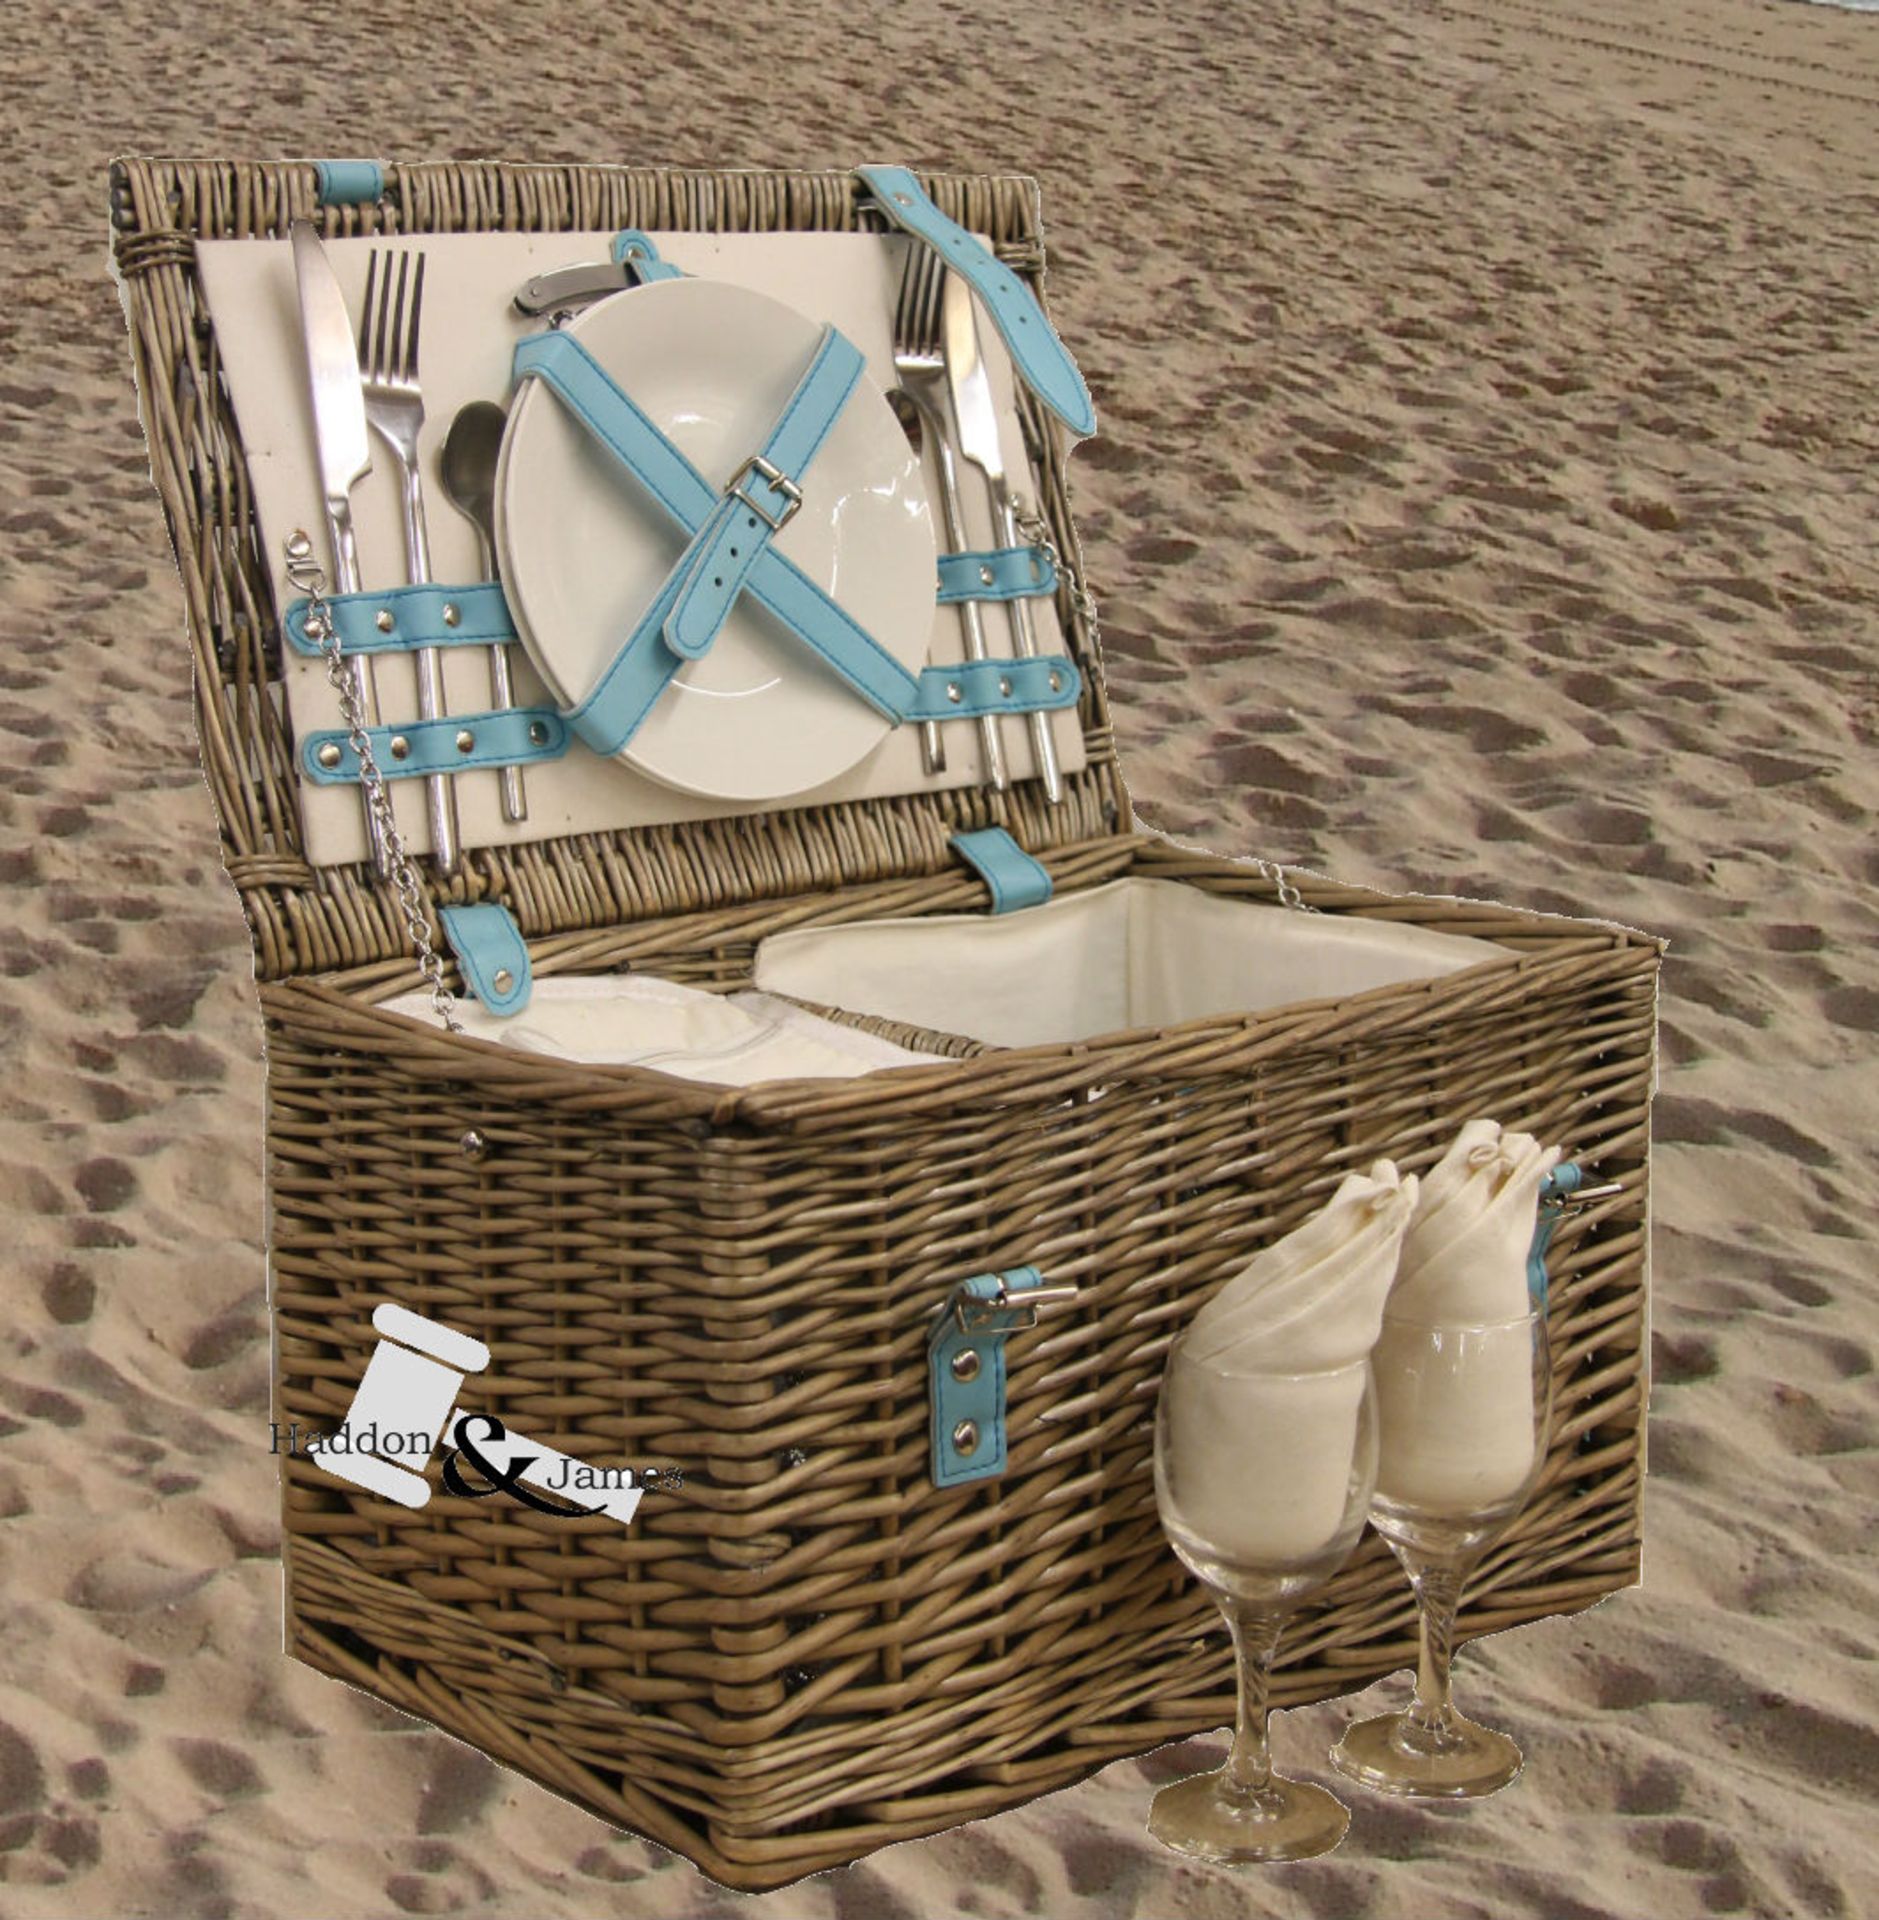 V *TRADE QTY* Brand New 2 Person Willow Hamper Basket with Cooler Section - Two China Plates - A Set